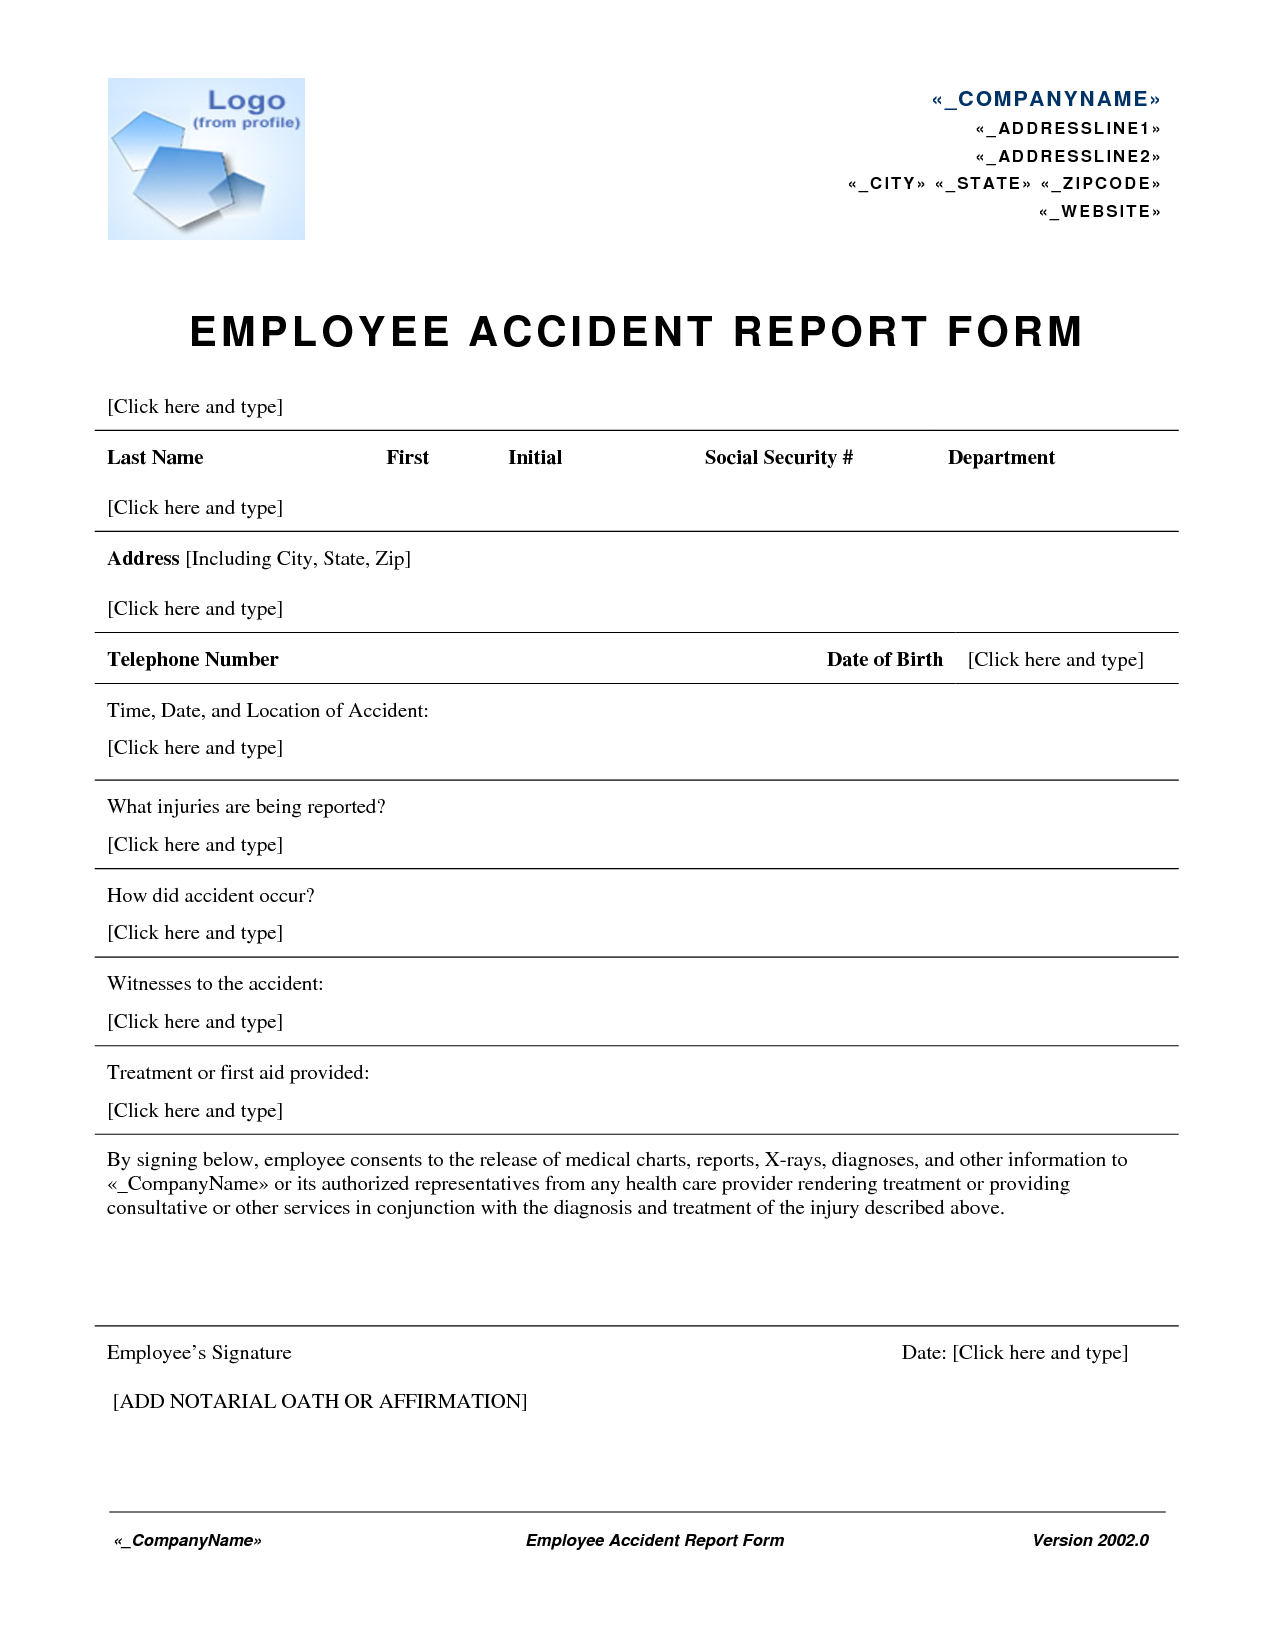 Incident Report Form Workplace Health And Safety Sample Letter In inside Incident Report Form Template Qld